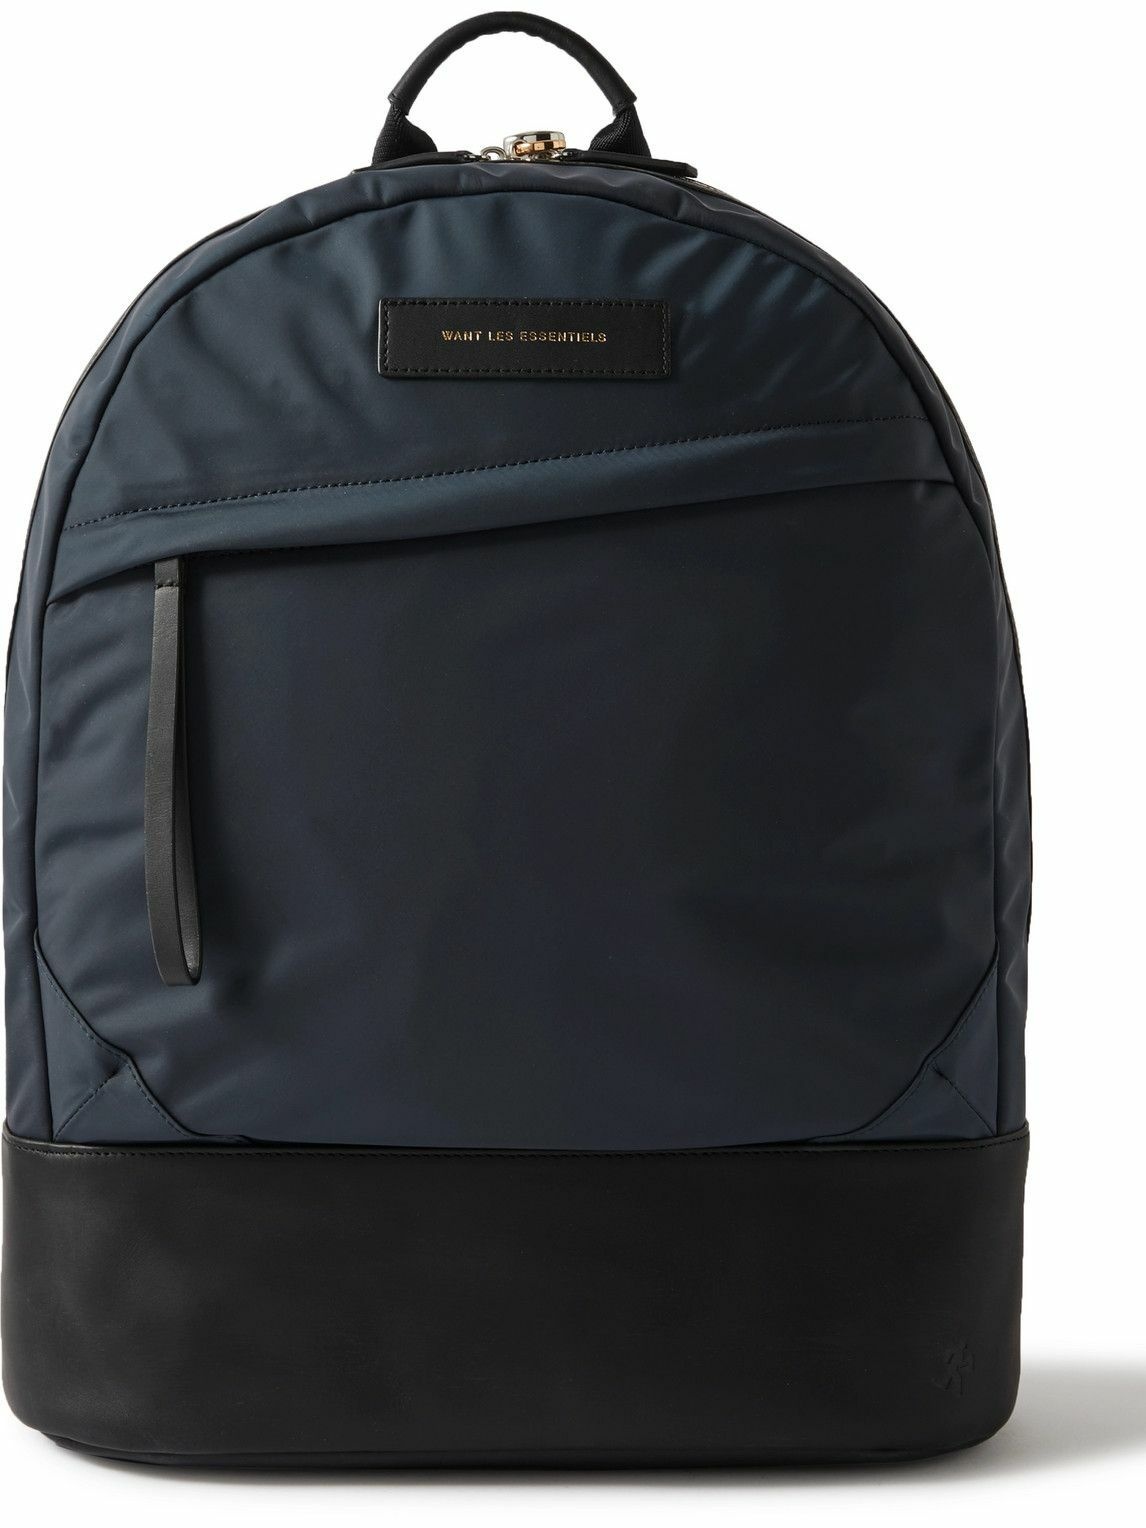 Photo: WANT LES ESSENTIELS - Kastrup 2.0 Leather-Trimmed Nylon Backpack